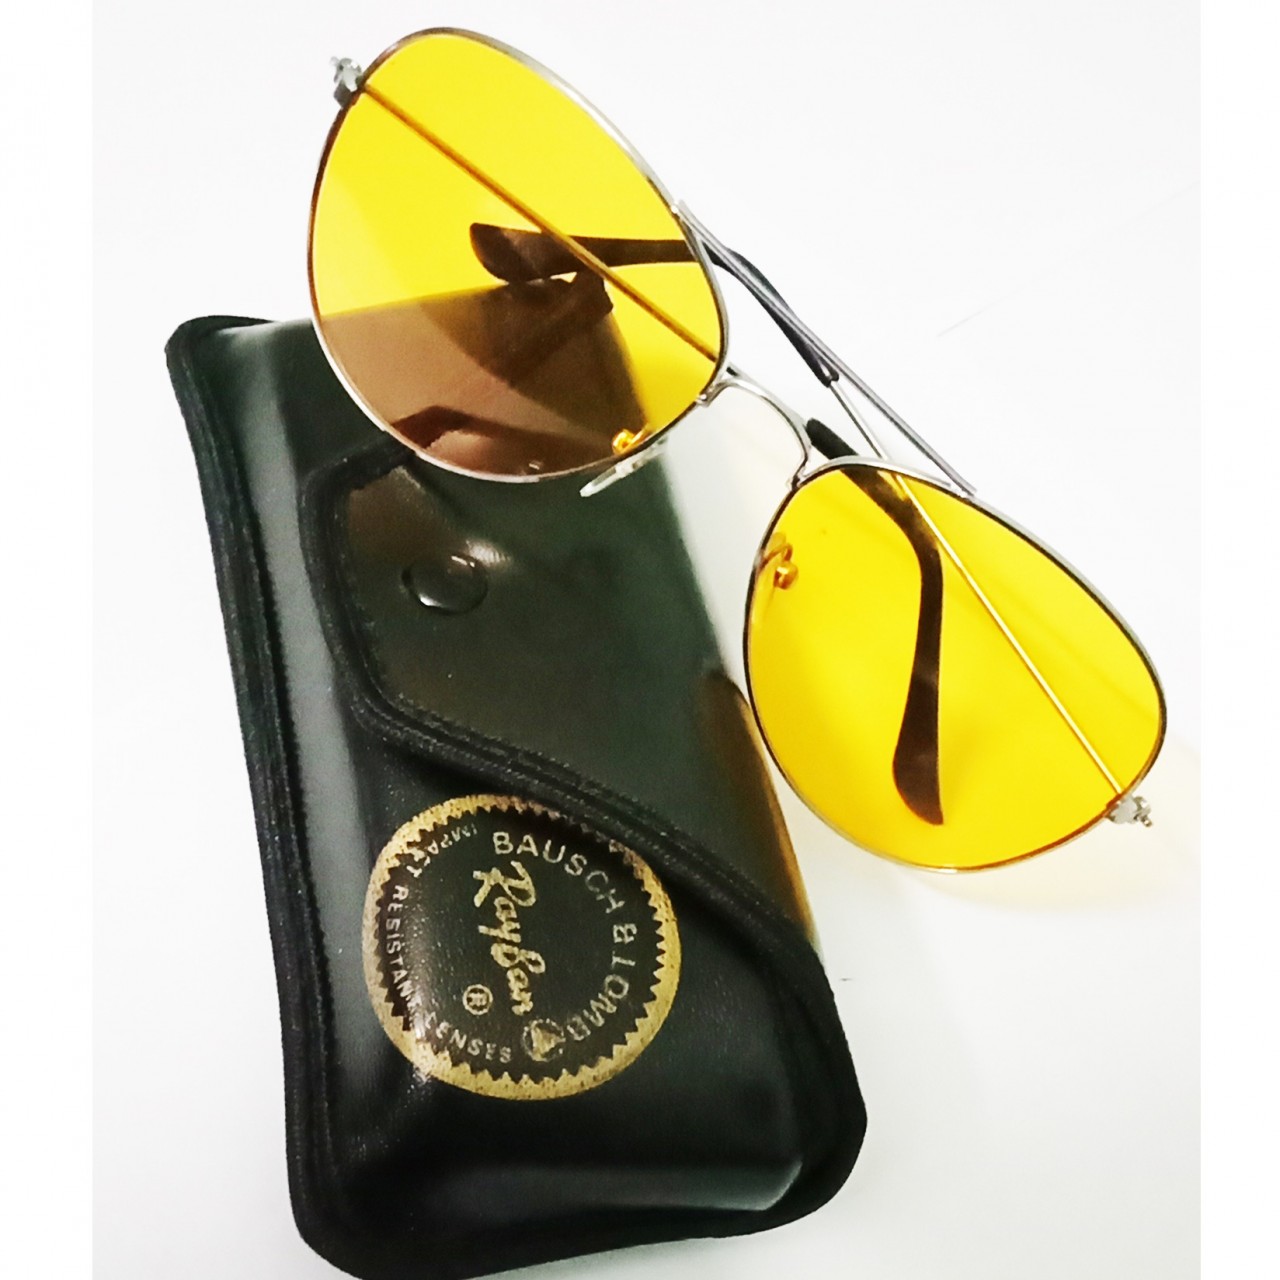 Fashionable unisex sunglasses in yellow color with pouch